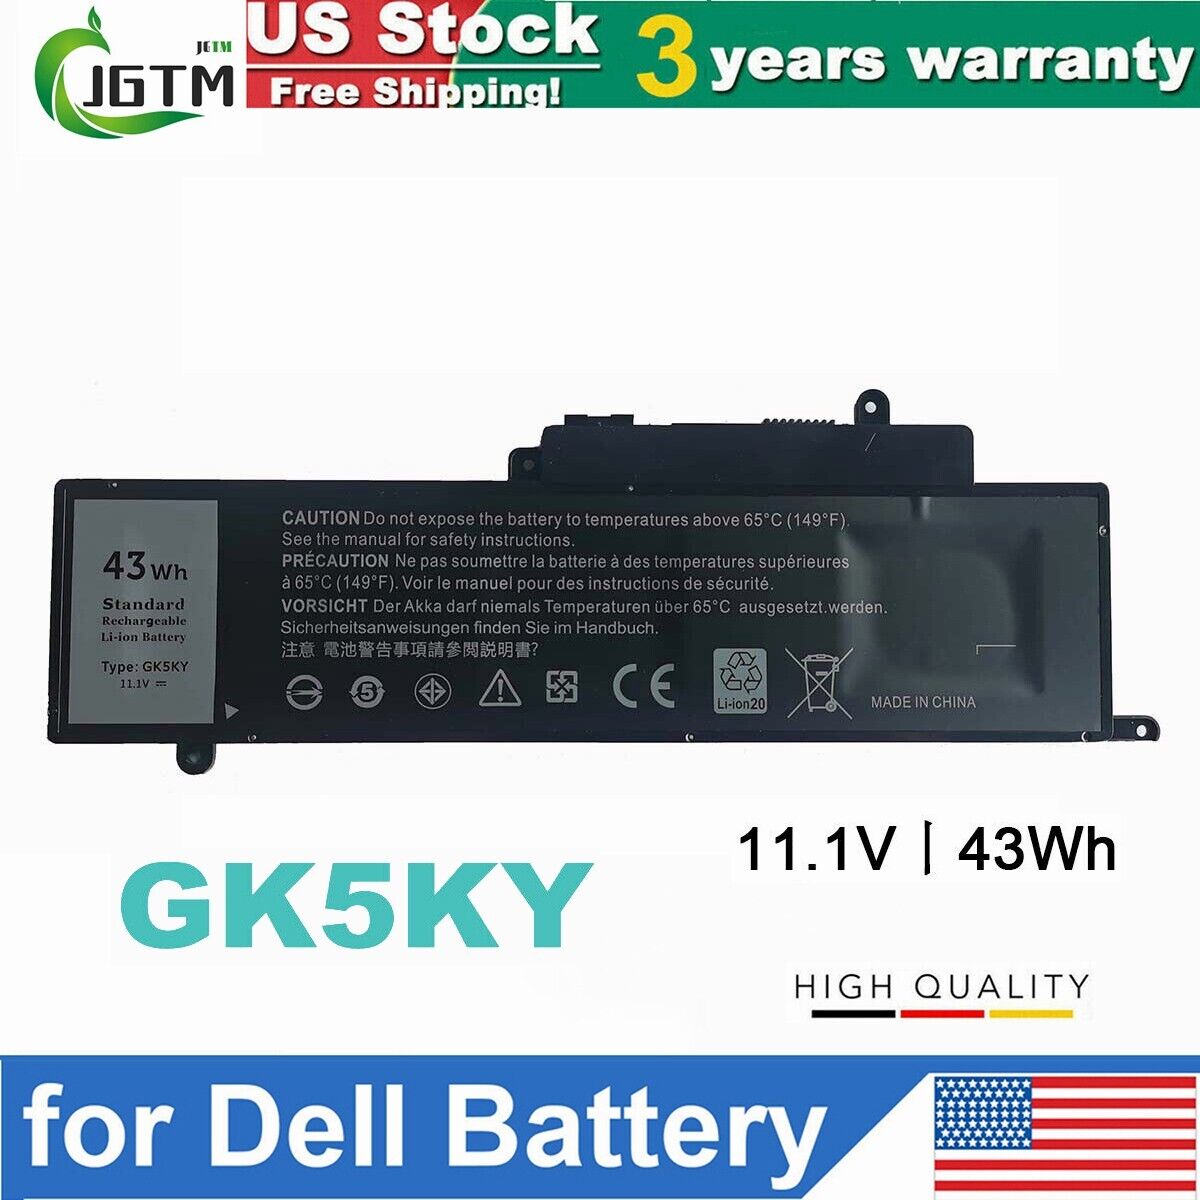 GK5KY Battery For Dell Inspiron 11 3000 3147 3148 3152 Series Inspiron 7000 43Wh